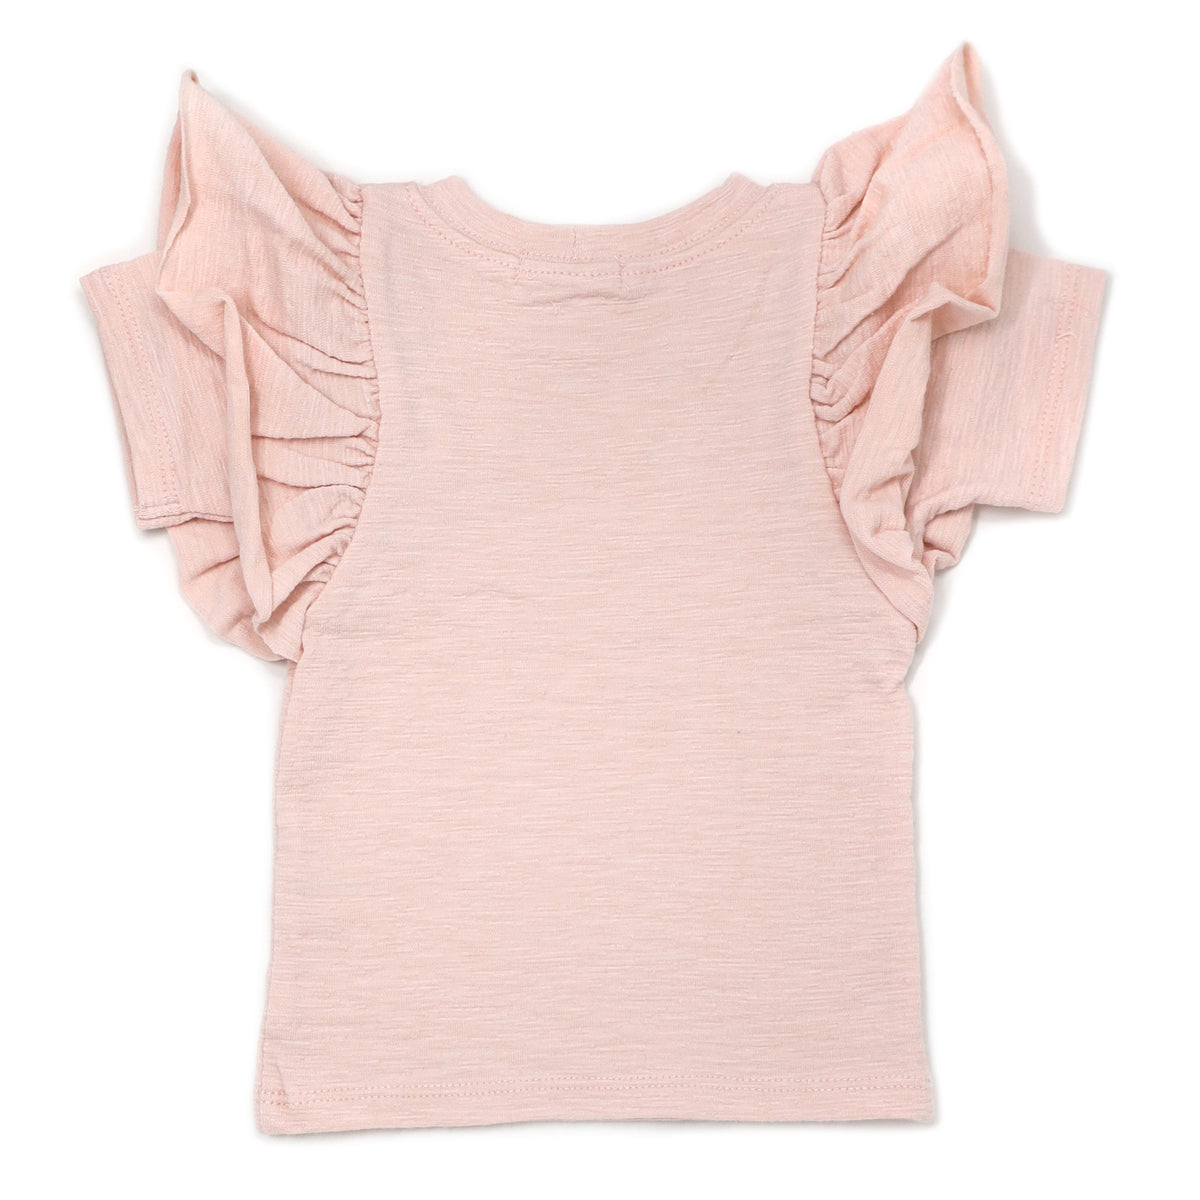 oh baby! Butterfly Short Sleeve Slub Tee -  "little loves" Embroidery - Pale Pink